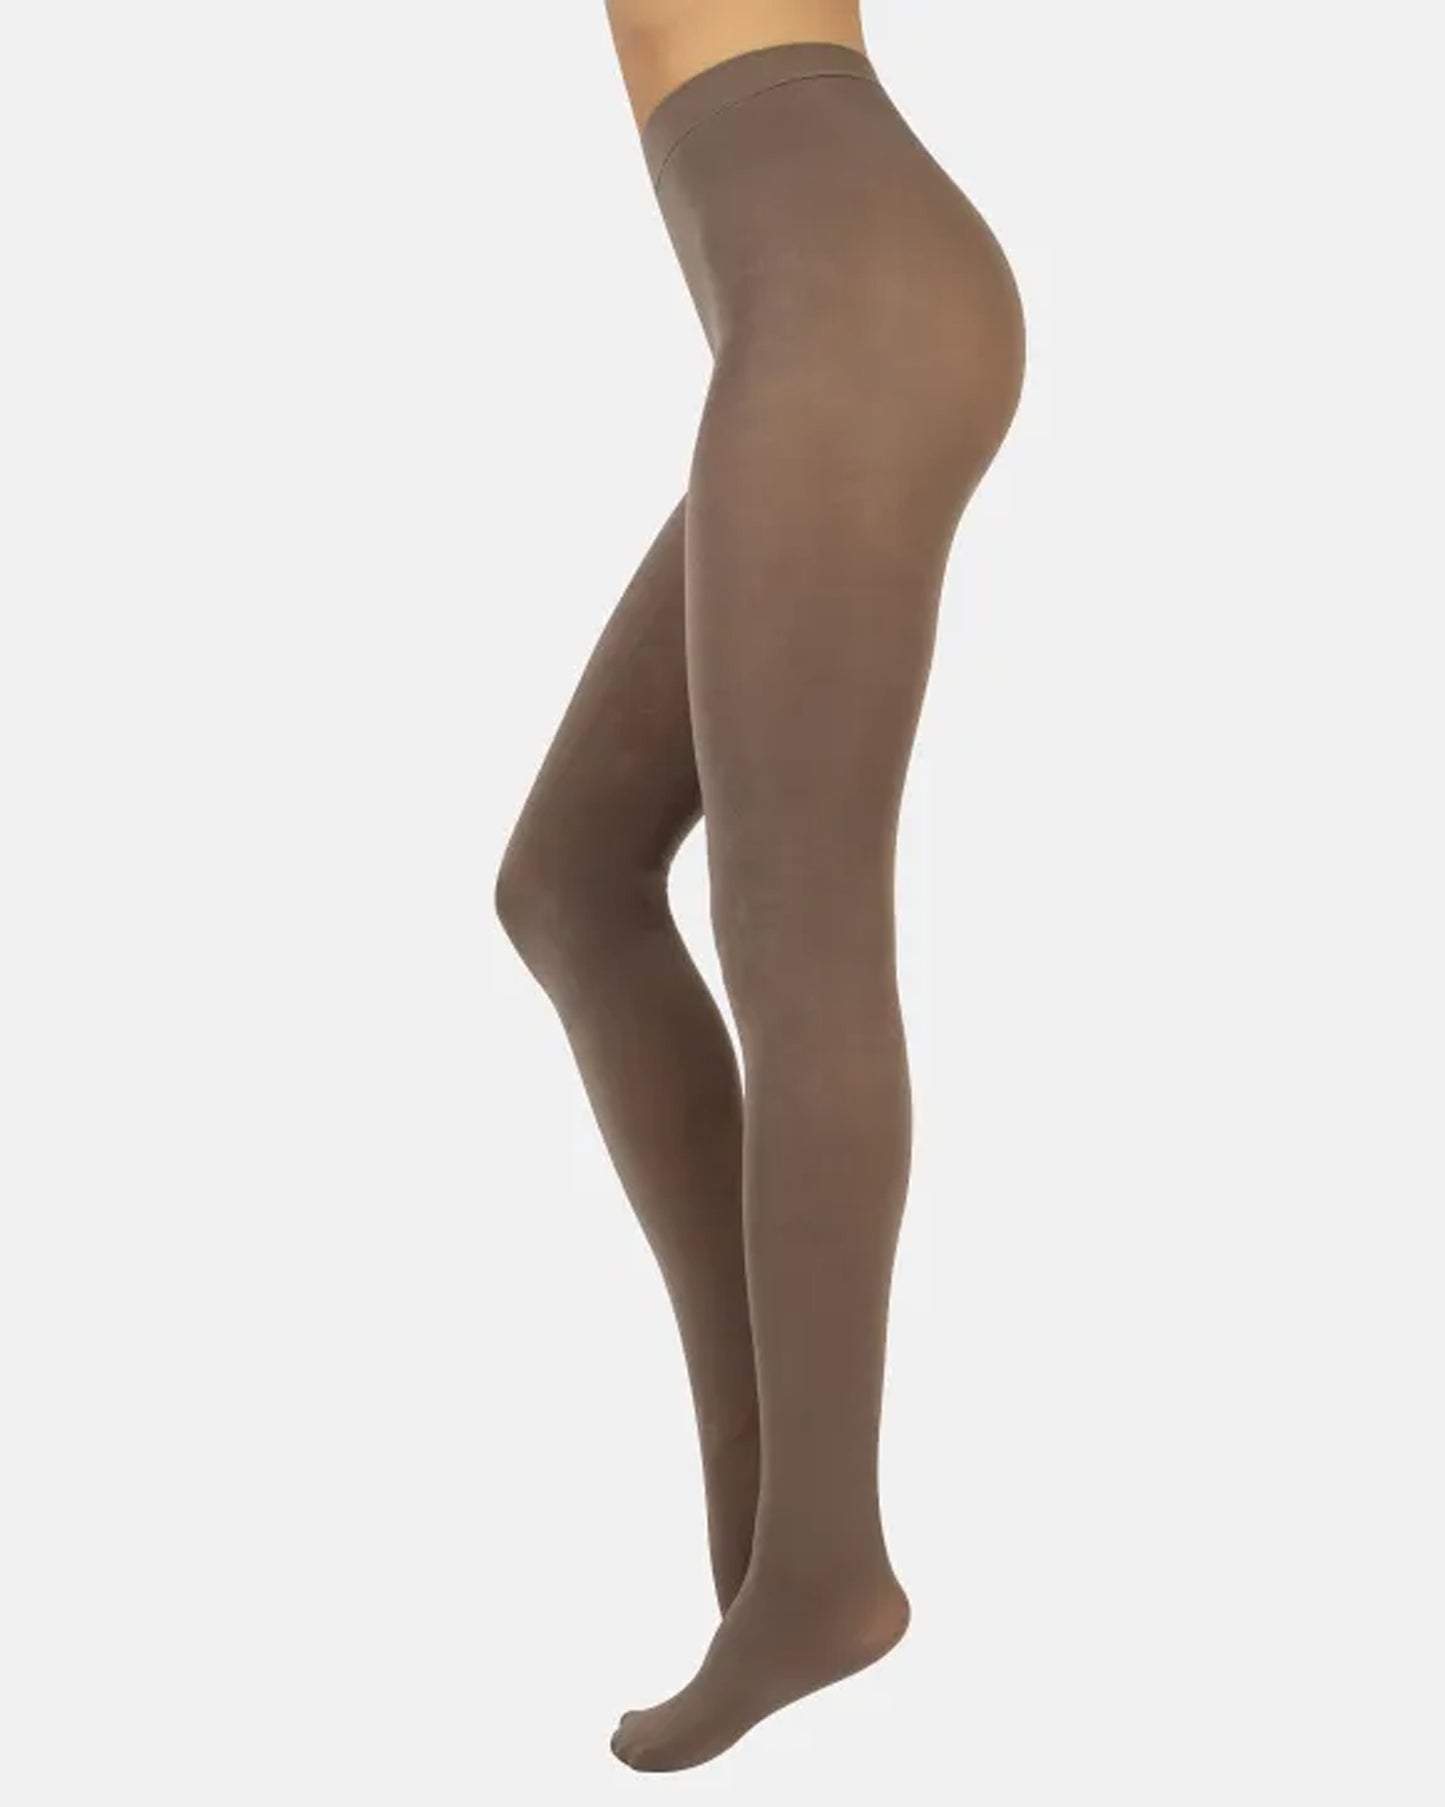 Calzitaly Cotton Tights - Warm and light beige knitted cotton mix tights with gusset, flat seams and comfort waist band.